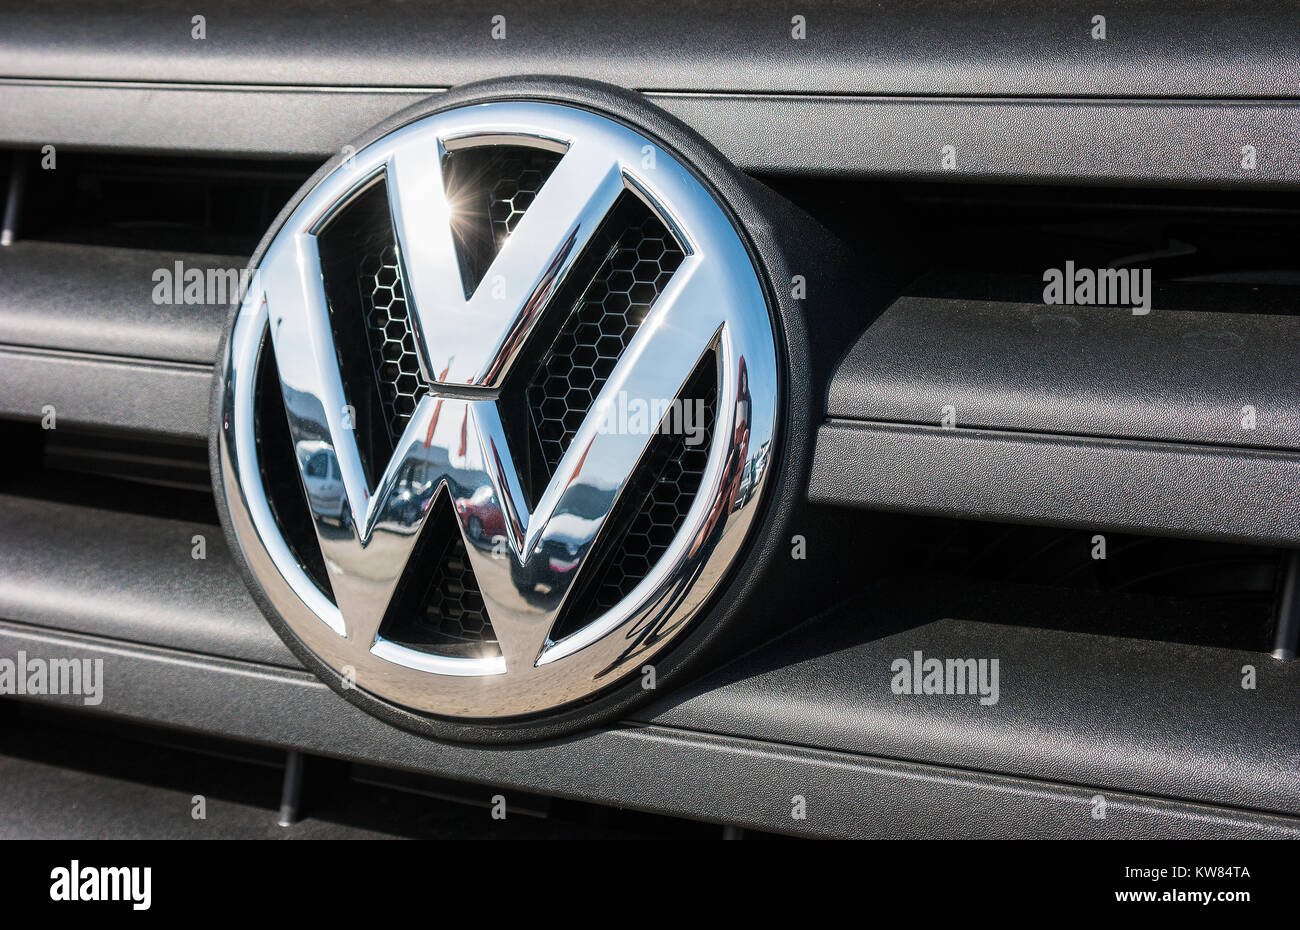 Volkswagen VW plate logo on a car grill. Volkswagen is a famous European car manufacturer company based on Germany. Stock Photo